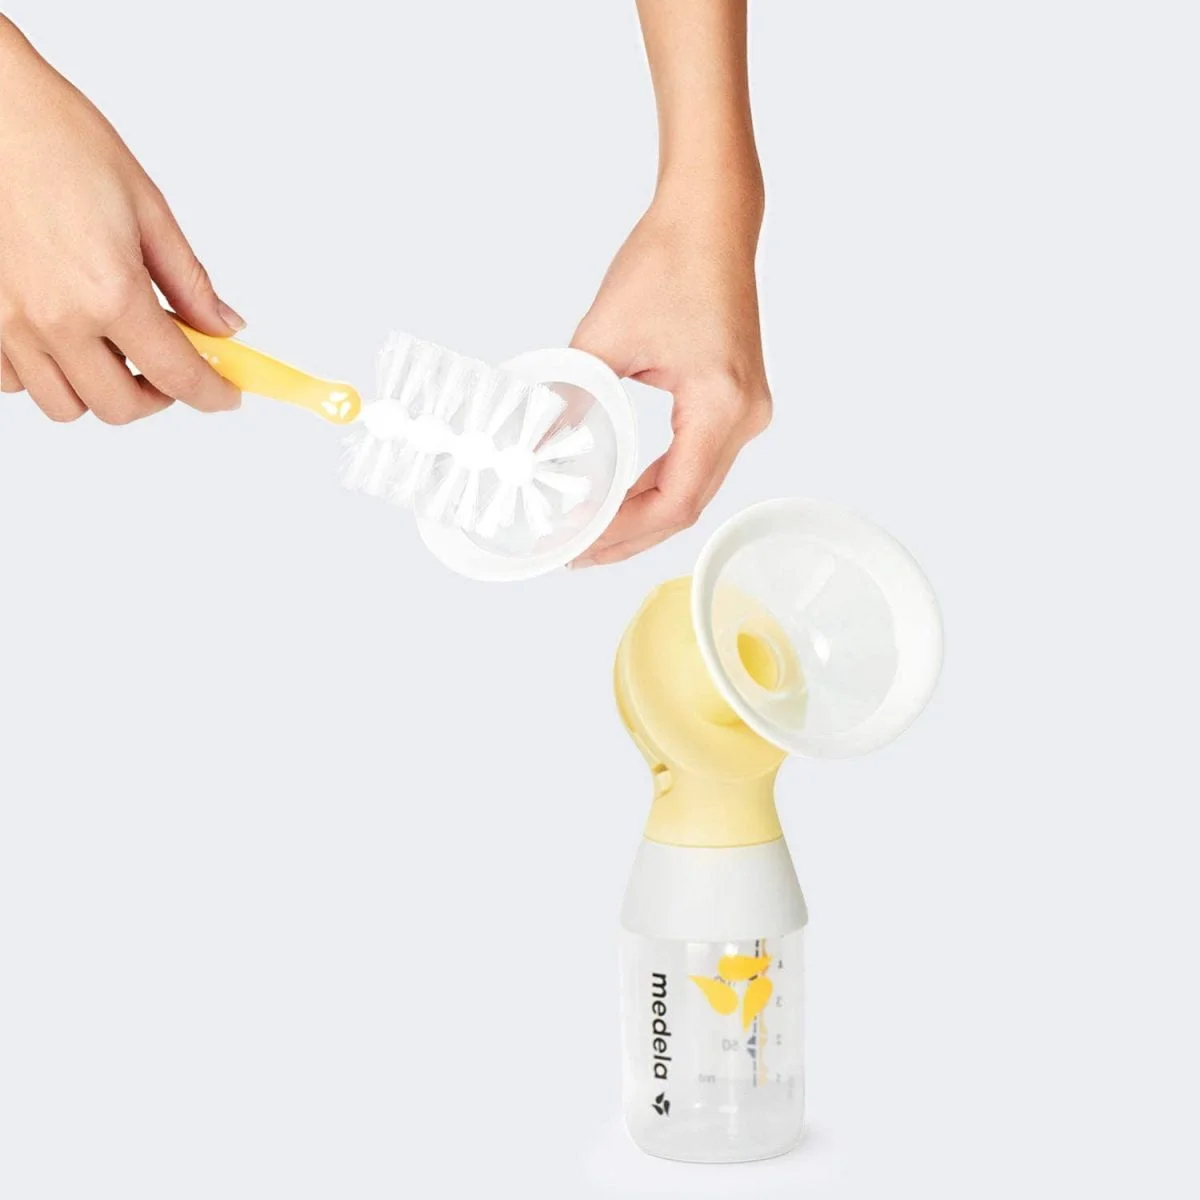 613Y9W4Kv5L. Ac Sl1500 Medela &Lt;H1 Class=&Quot;Mtop0&Quot;&Gt;Medela - Swing Maxi Flex Double Electric Breast Pump&Lt;/H1&Gt; Https://Www.youtube.com/Watch?V=6Jgwy593Of4 The Breast Pump Includes A Soft-Touch, Ergonomic Swivel Handle - To Utilise Our Research-Based, Patented 2-Phase Expression Technology. Through Research, Medela Has Learned That There Are Two Distinct Phases Of How Babies Breastfeed. The First Phase, Known As The Stimulation Phase Is When The Baby First Goes To The Breast And Sucks Fast To Initiate The Milk Flow. The Second Phase Of Expression Occurs After Milk Flow Or Let-Down Begins. During This Phase, The Baby Breastfeeds At A Slower Suck Rate For Continued Milk Flow. At Medela, We Integrated This Natural Sucking Behaviour Into Our Breast Pumps To Create Harmony The First Manual Breast Pump To Offer 2-Phase Expression Technology. Harmony'S Single Vacuum Manual Settings Are Easy To Adjust, Making The Pumping Experience Convenient And More Comfortable. Mothers Have The Flexibility To Switch Between The Modes By Adjusting The Handle. This Is The Key To Efficient Breast Pumping And A Major Reason Why Medela Is The Leading Breast Pump Recommended By Doctors For New Mothers. Mothers Can Significantly Reduce The Time Taken To Express Because The Milk Flows Faster And More Easily. &Lt;Pre&Gt;&Lt;B&Gt;We Also Provide International Wholesale And Retail Shipping To All Gcc Countries: Saudi Arabia, Qatar, Oman, Kuwait, Bahrain. Warranty: Pump - 1 Year, Battery - 6 Months&Lt;/B&Gt;&Lt;/Pre&Gt; Breast Pump Medela Swing Maxi Flex Double Electric Breast Pump